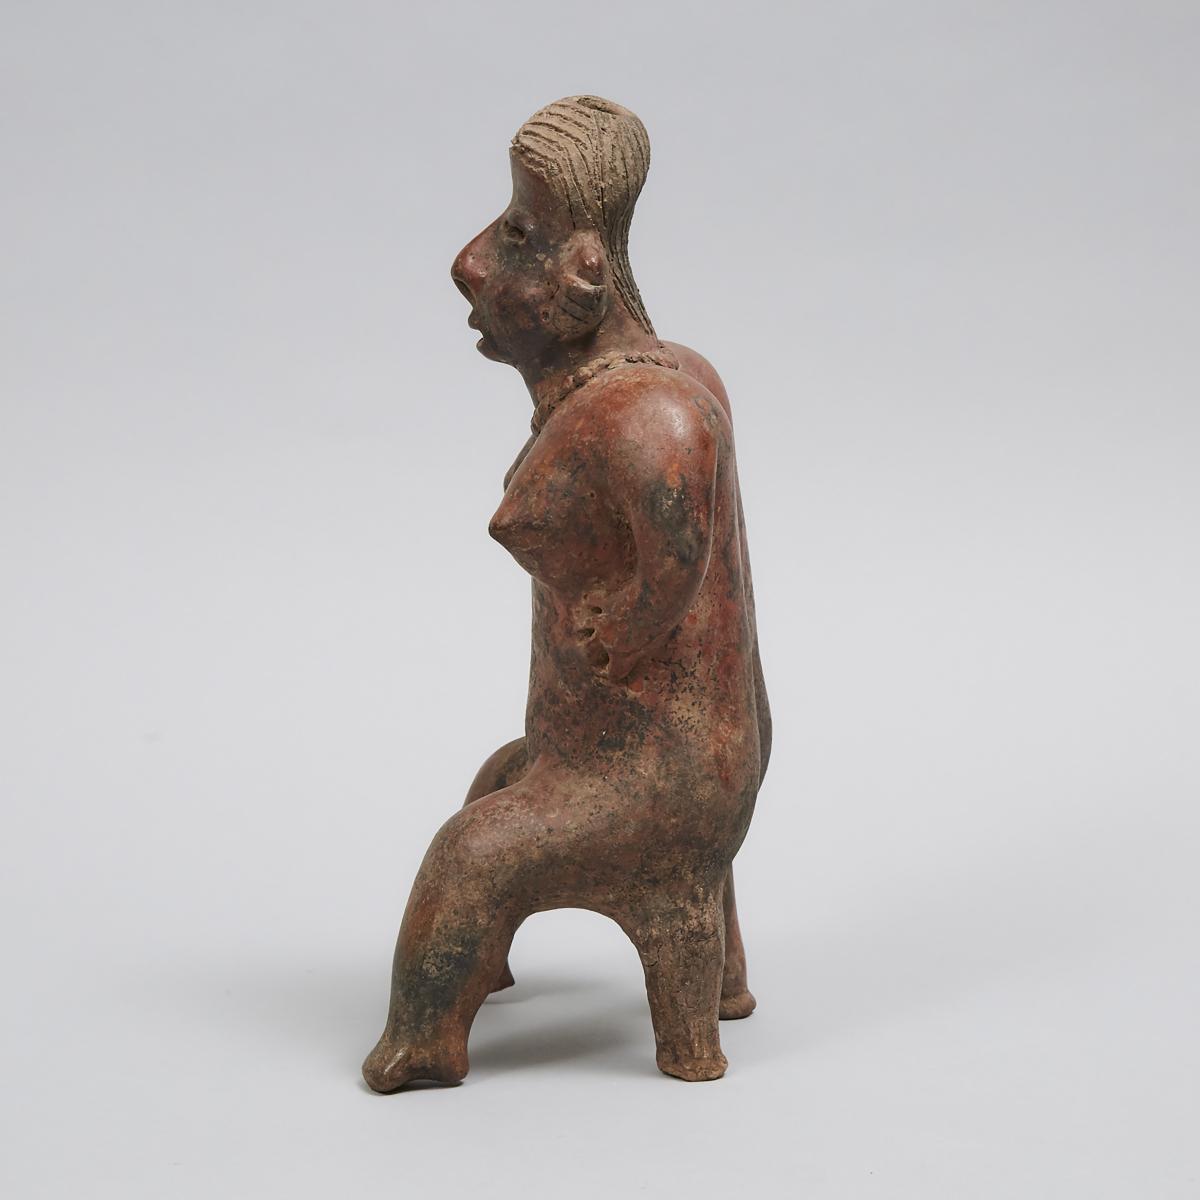 Nayarit Ixtlán del Río style Redware Pottery Figure, West Mexico, 100 B.C. - 200 A.D., height 13.2 i - Image 4 of 4